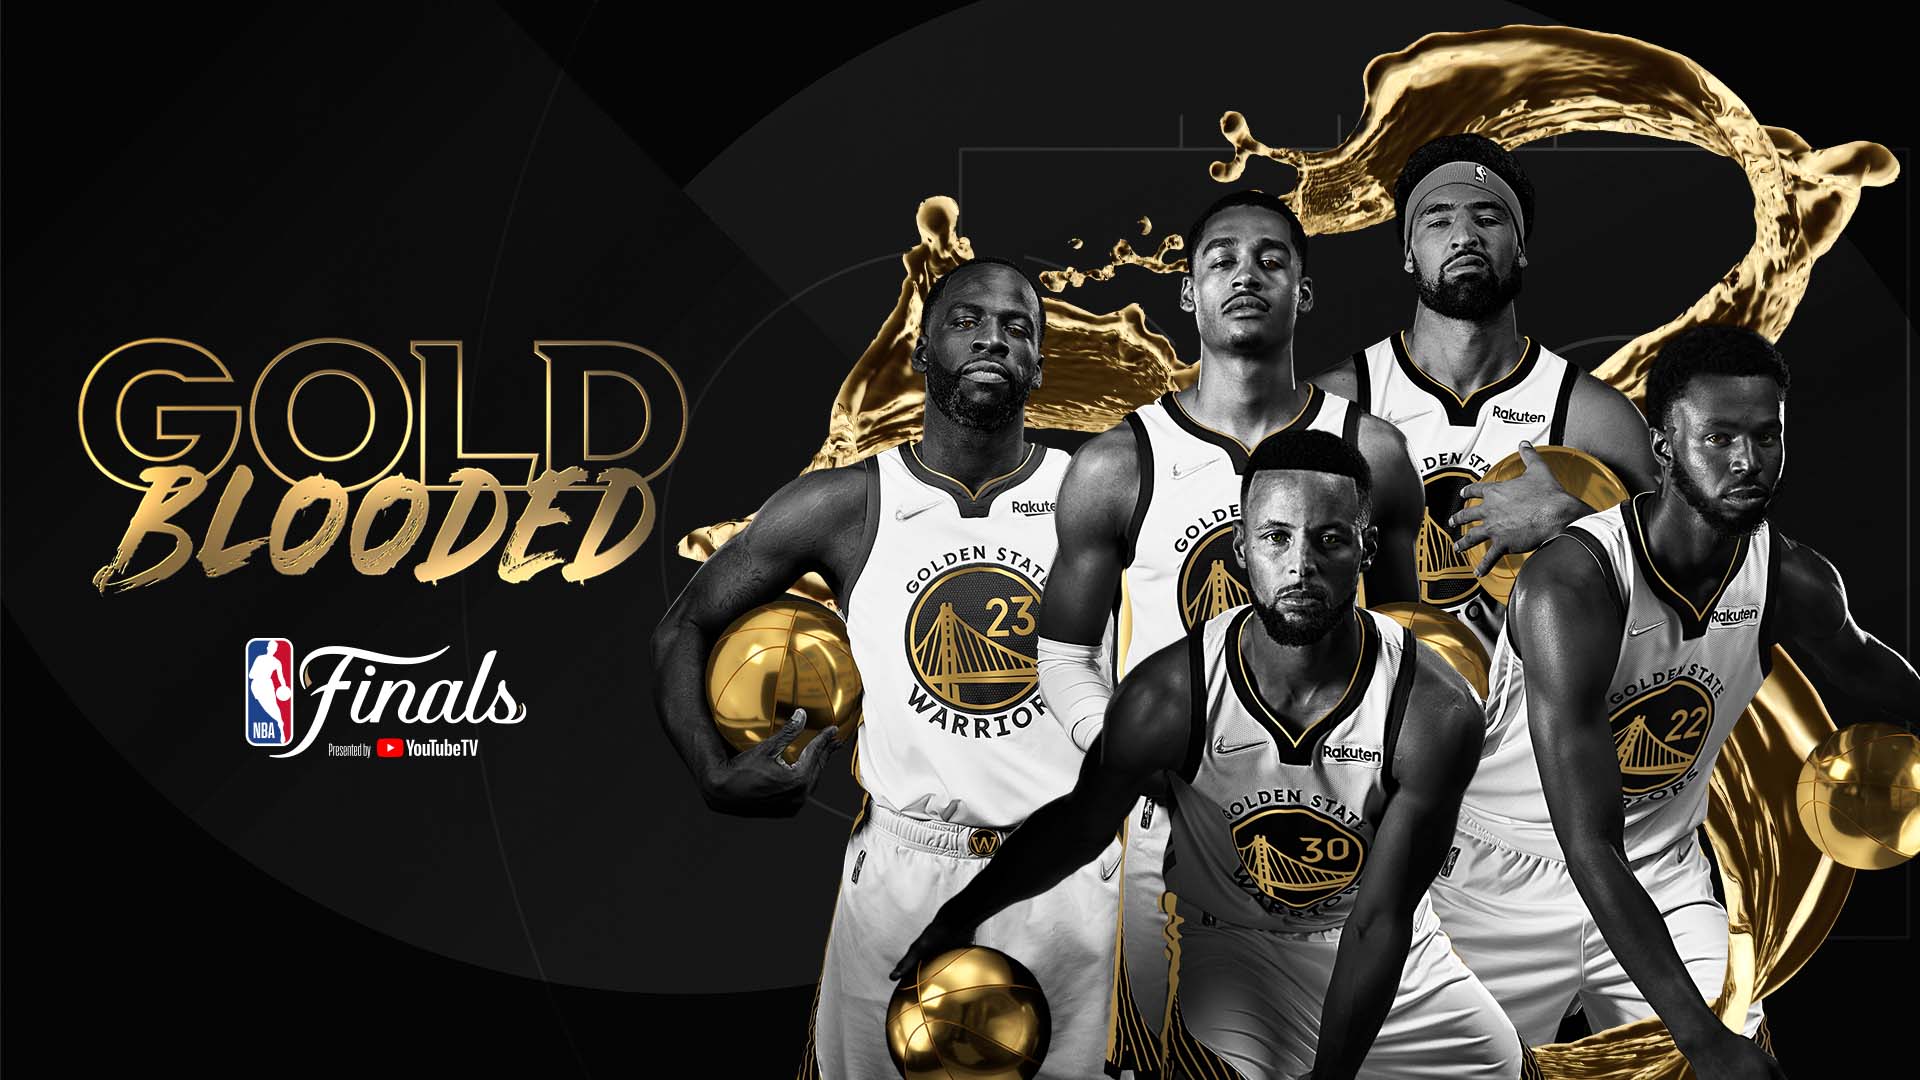 HoopsWallpaperscom  Get the latest HD and mobile NBA wallpapers today  Golden State Warriors Archives  HoopsWallpaperscom  Get the latest HD  and mobile NBA wallpapers today